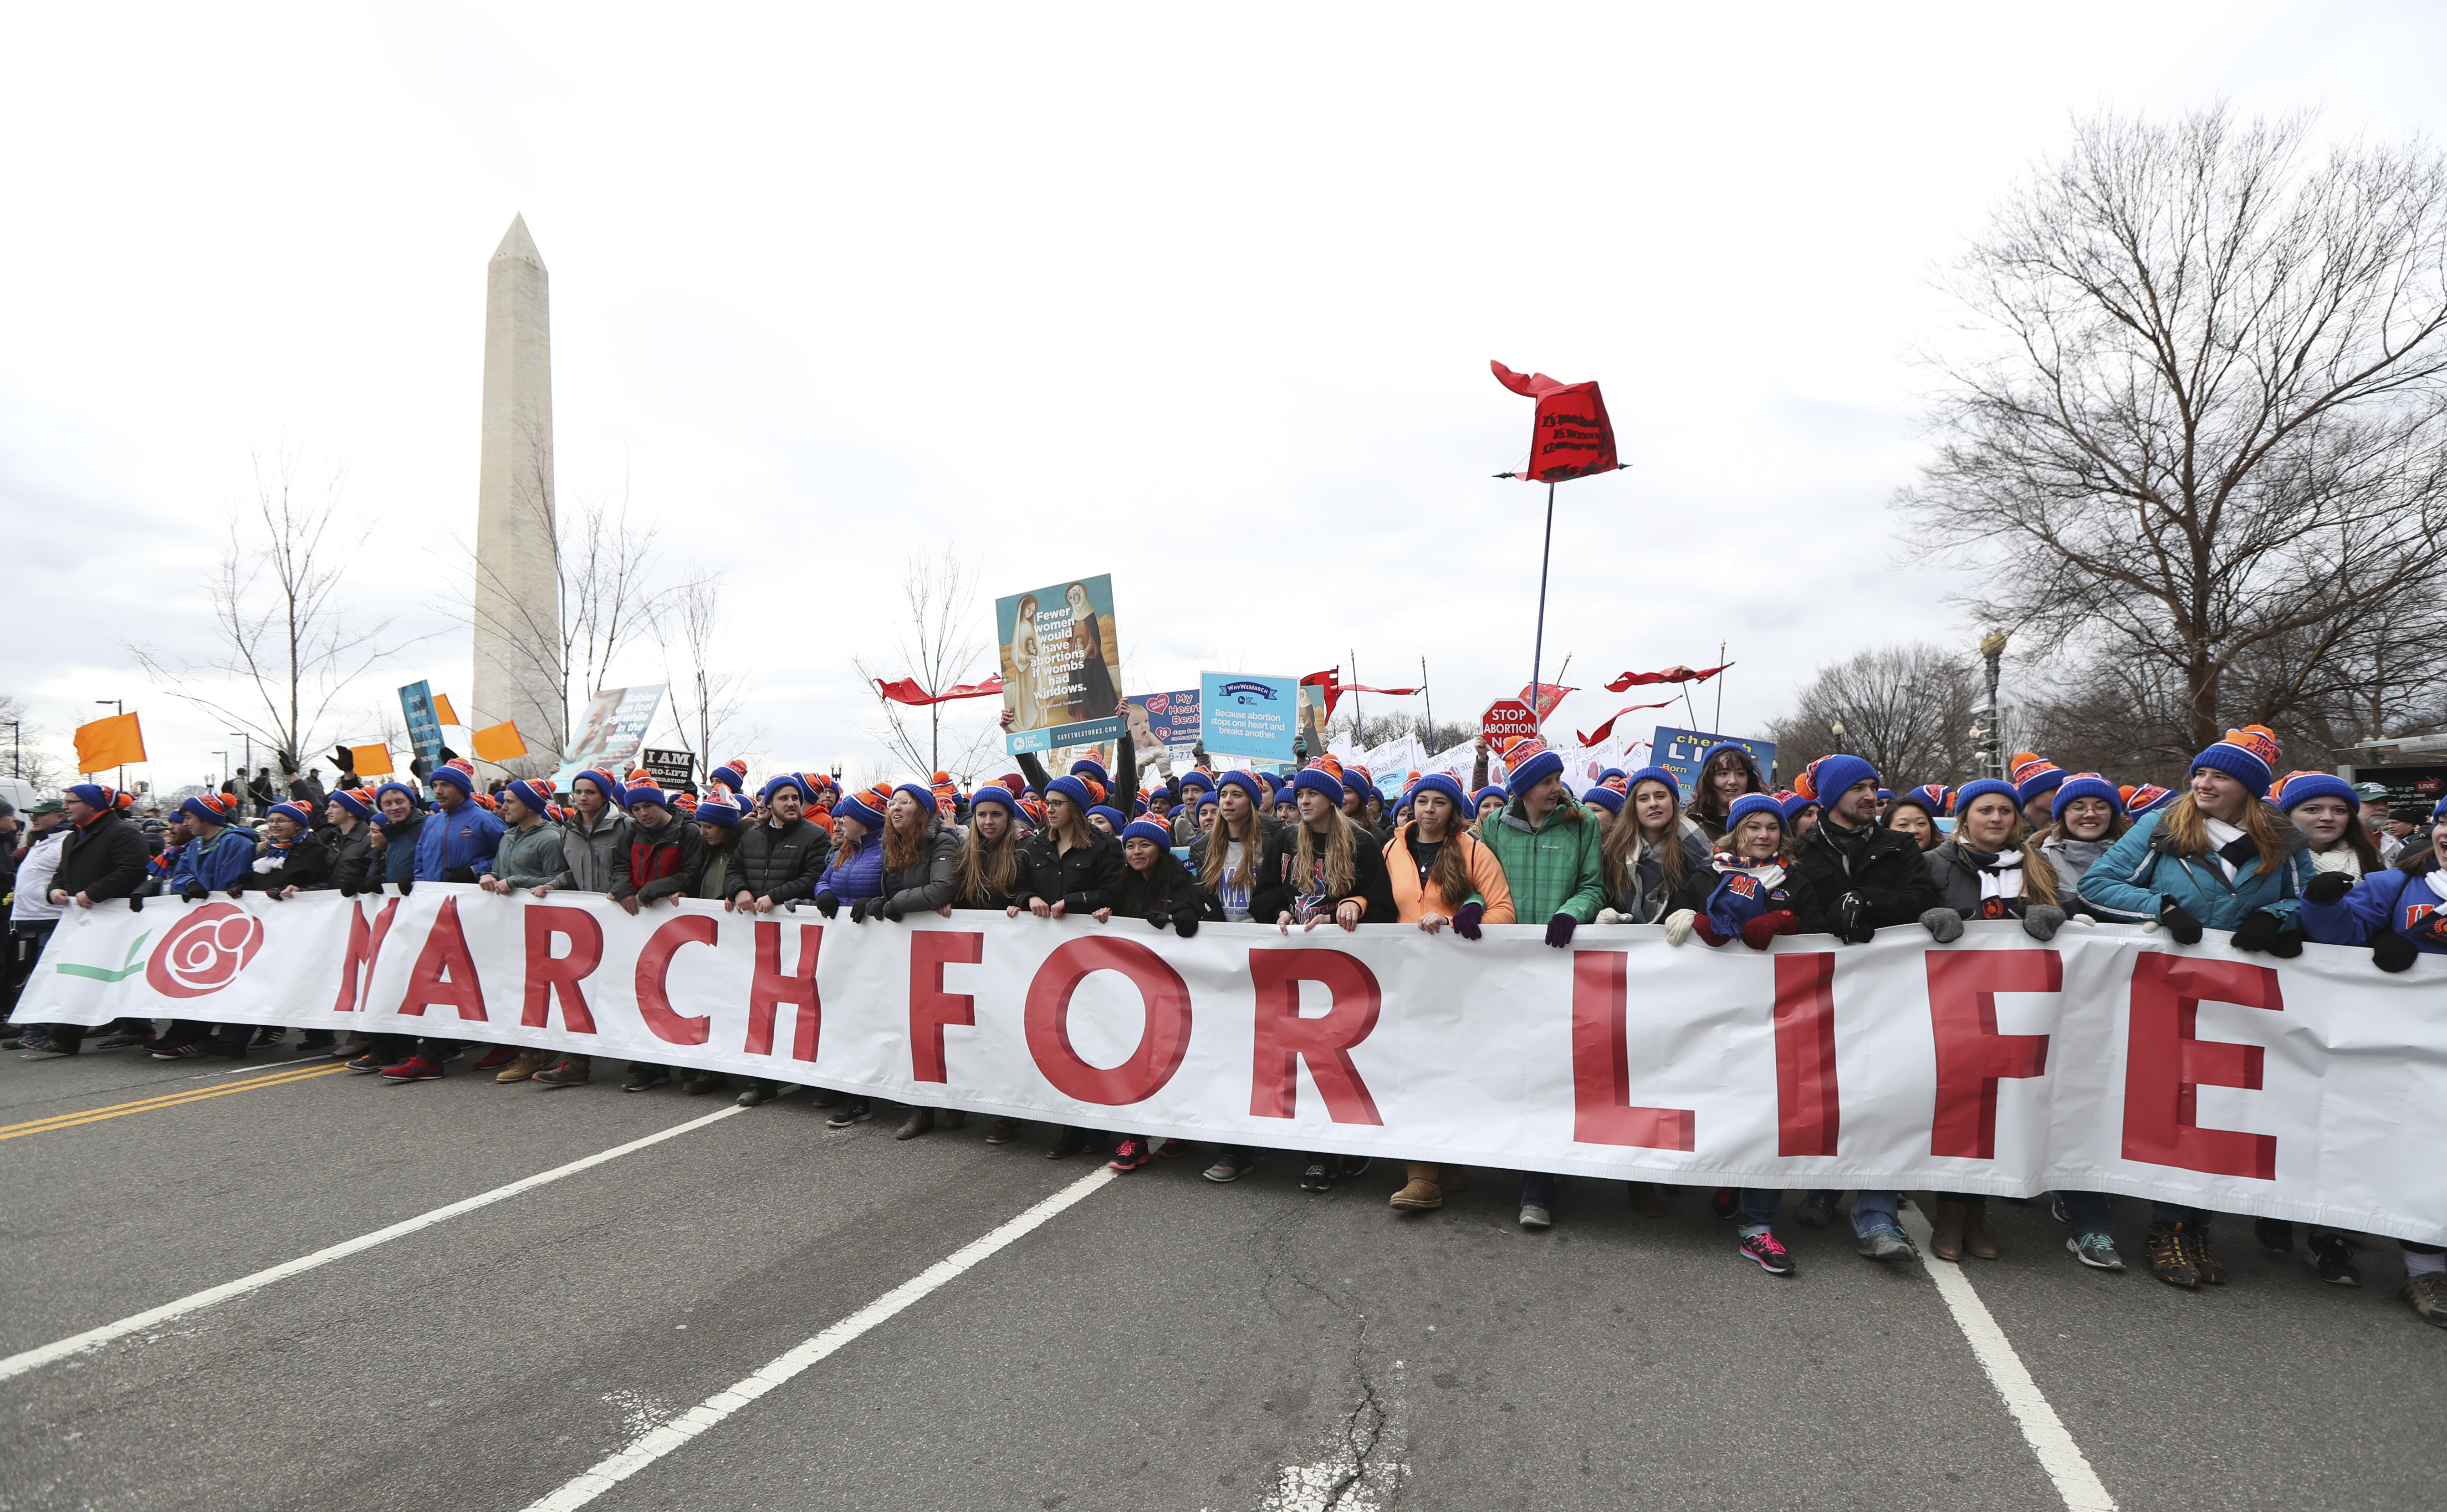 Participants in the March for Life march near the National Mall in Washington in January 2017. 
PBS, in an effort to highlight how many citizens are defying easy stereotypes and finding their way in the Trump era, featured a piece about a “pro-life feminist” who had attended both the March for Life and the Women’s March